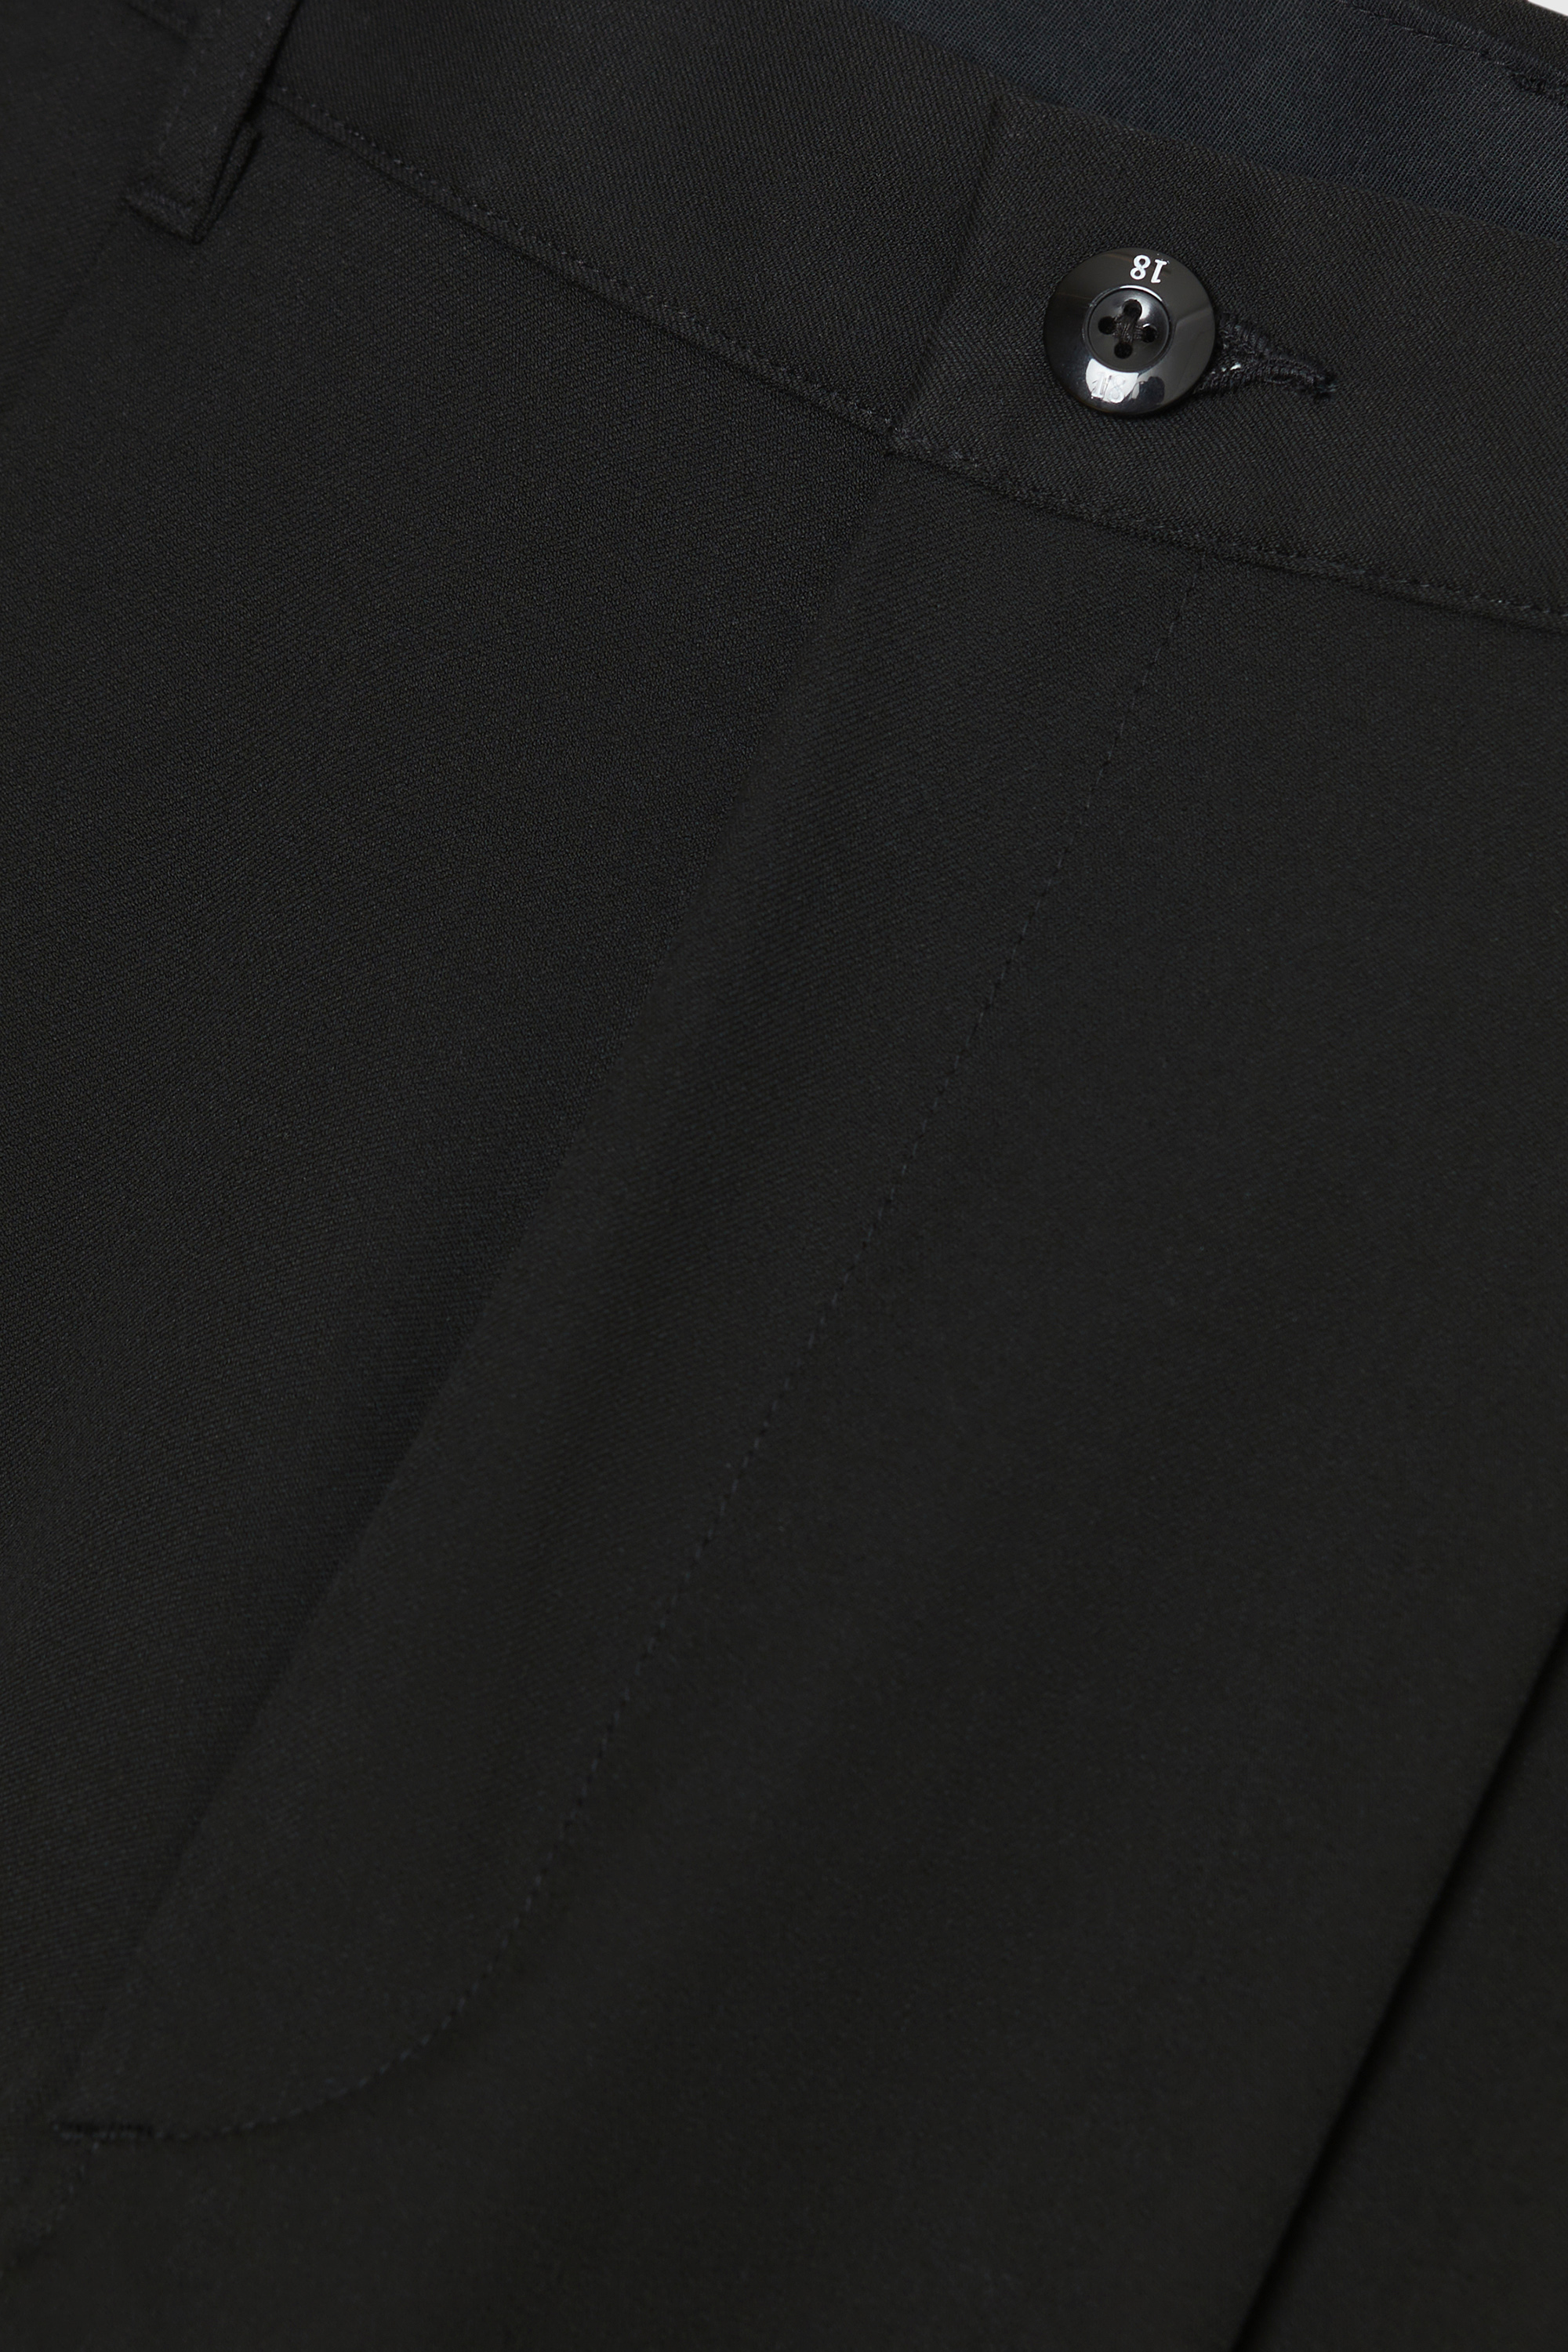 Solid Homme: Black One Tuck Trousers